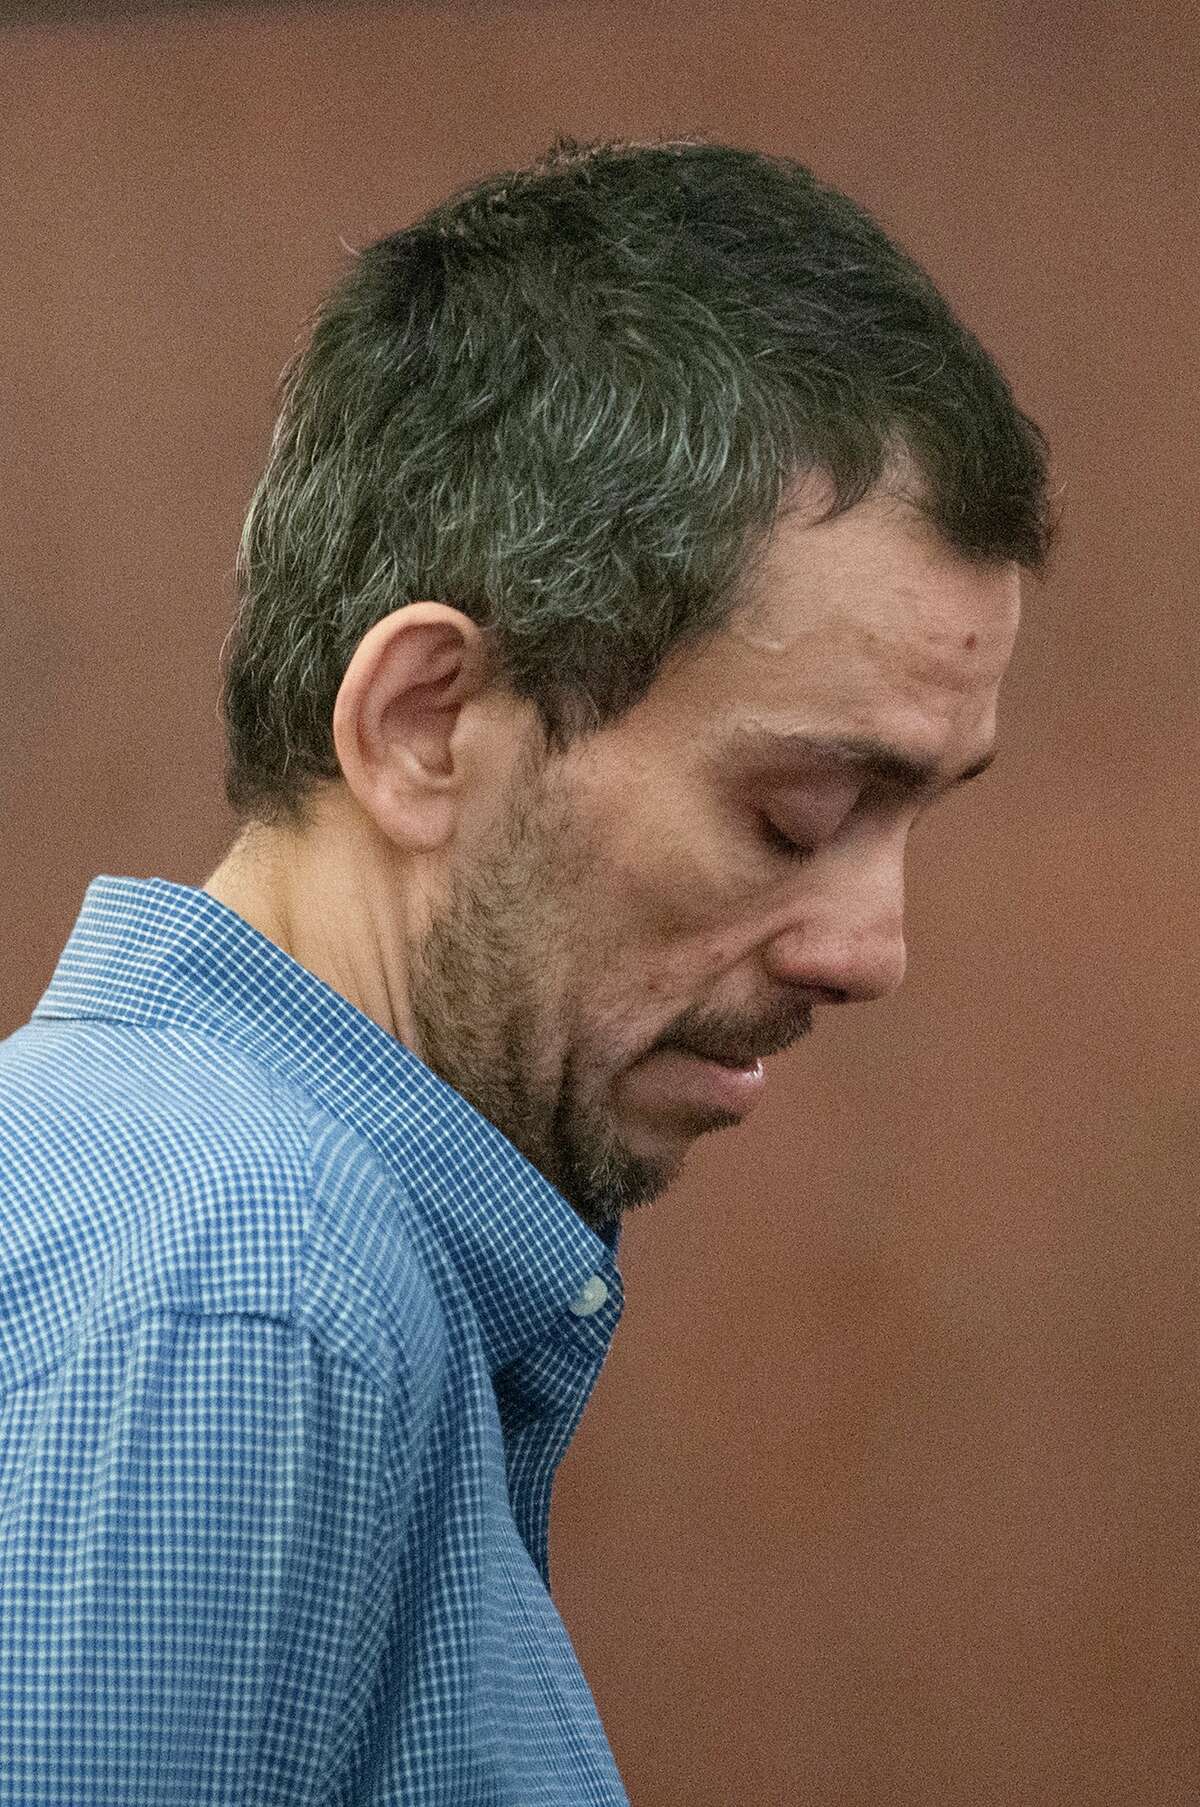 Pablo Cruz reacts after a jury found him guilty of second-degree murder Wednesday, July 23, 2014, at the Albany County Courthouse in Albany.